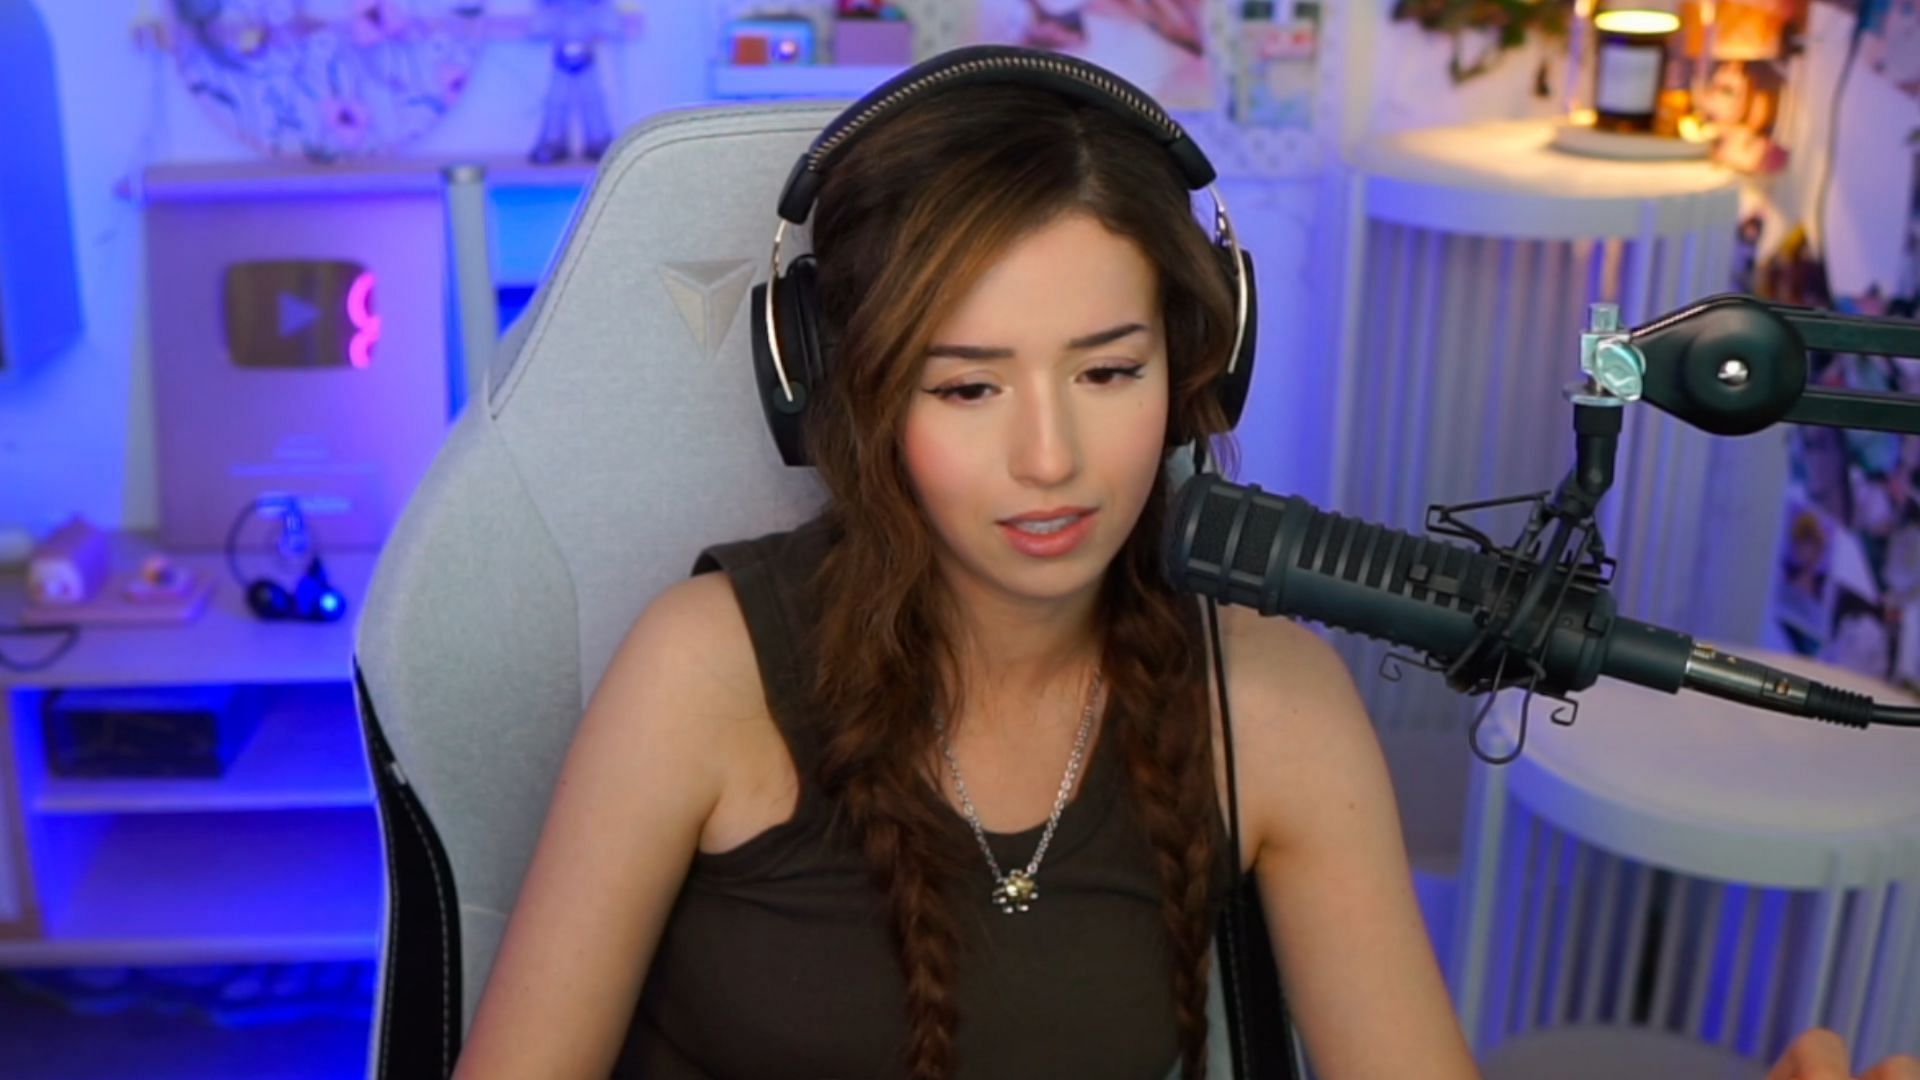 This is Cyberbullying!: Pokimane learns how Slither.io works the hard way